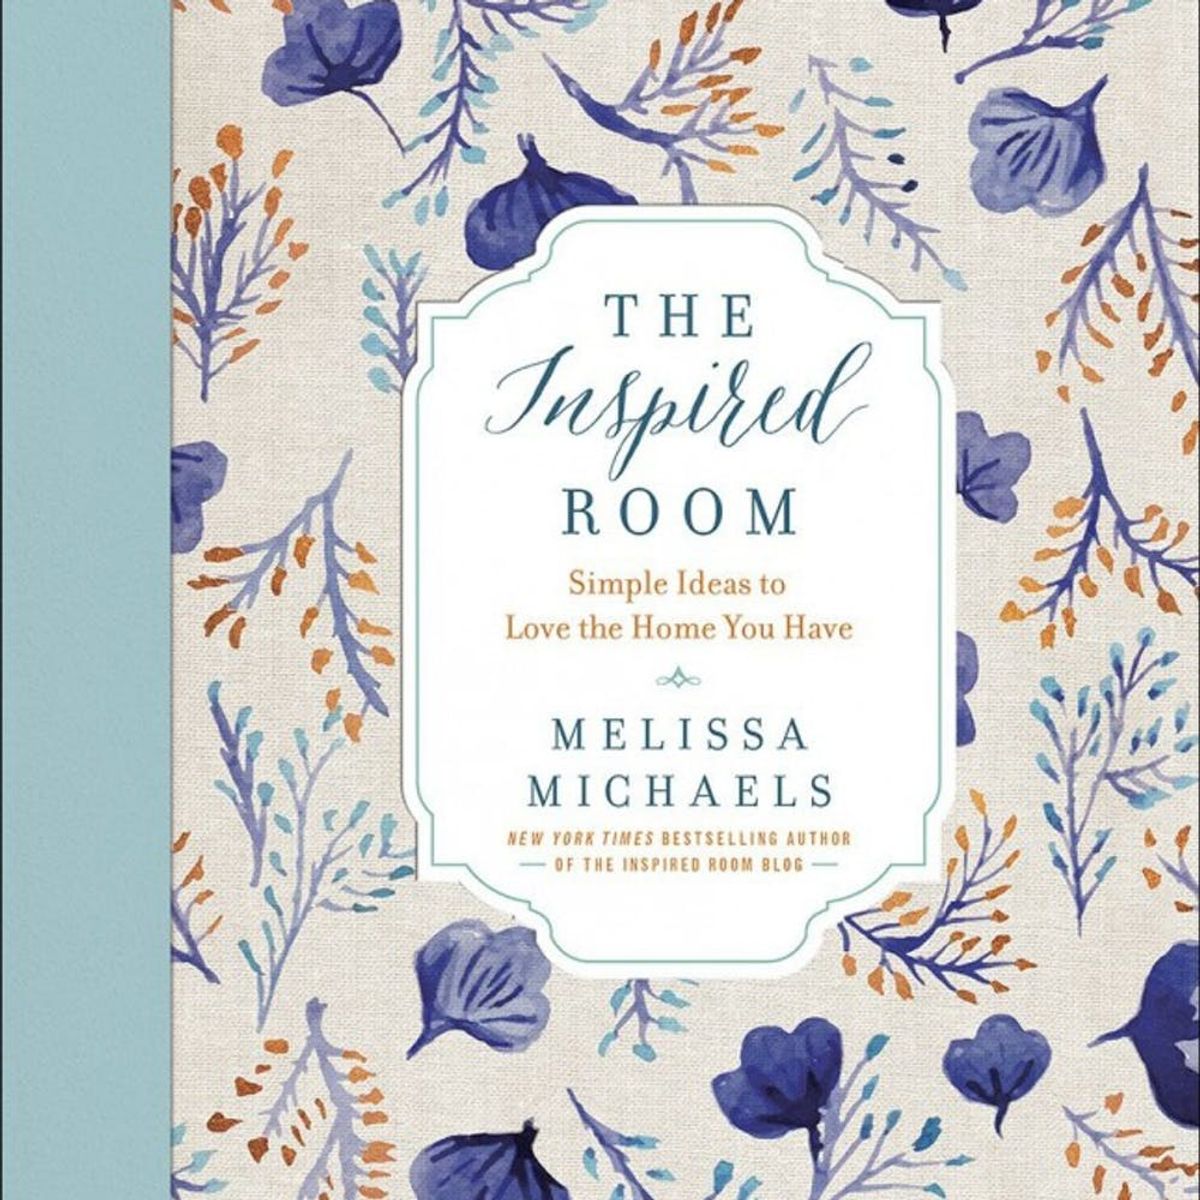 11 New, Pretty Books to Dress Up Your Coffee Table